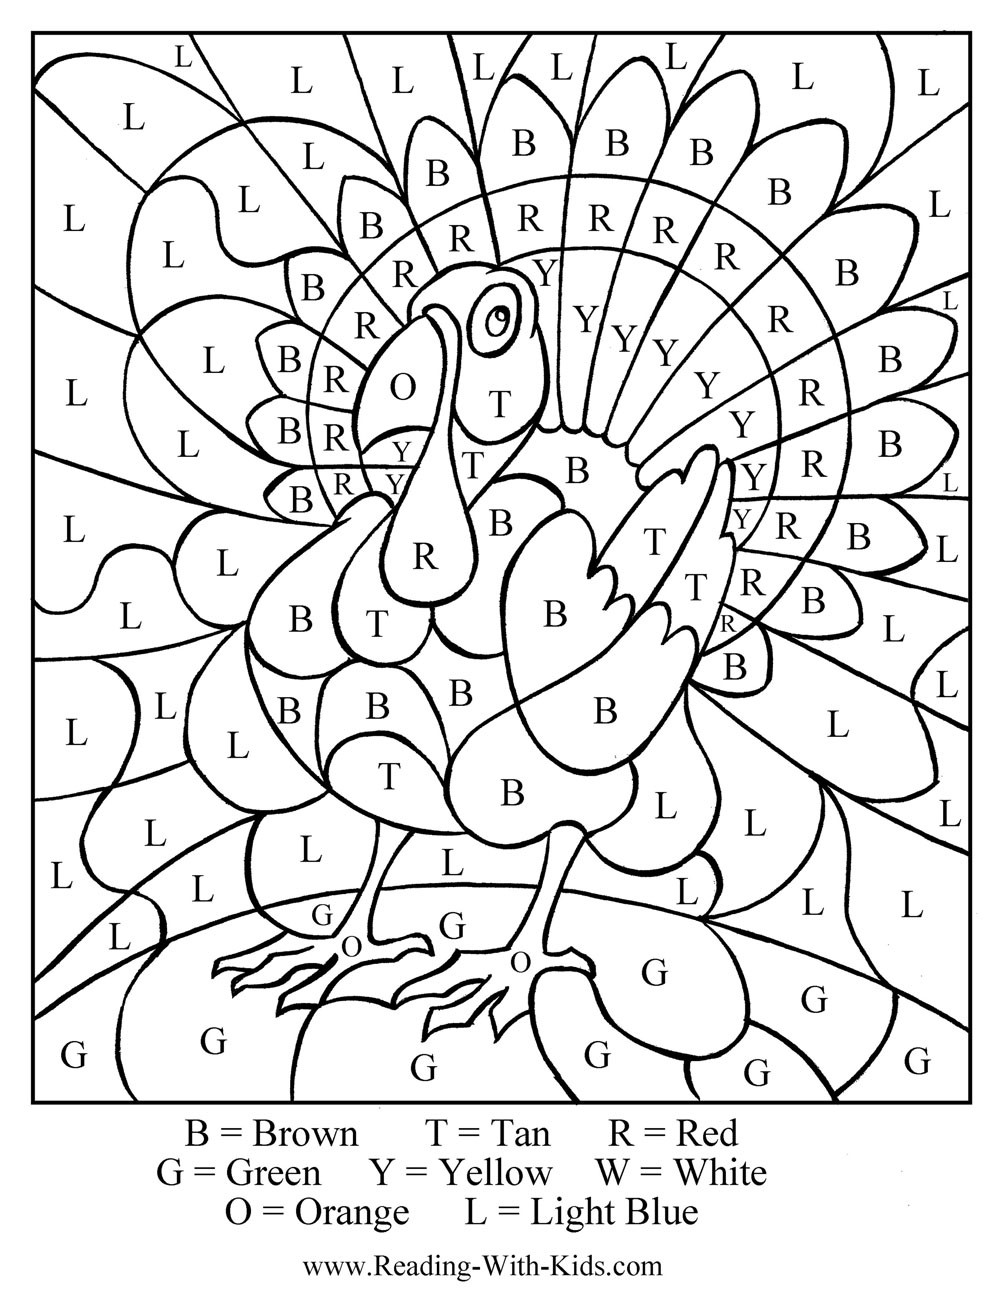 Printable Turkeys Coloring Pages
 Thanksgiving Coloring Pages